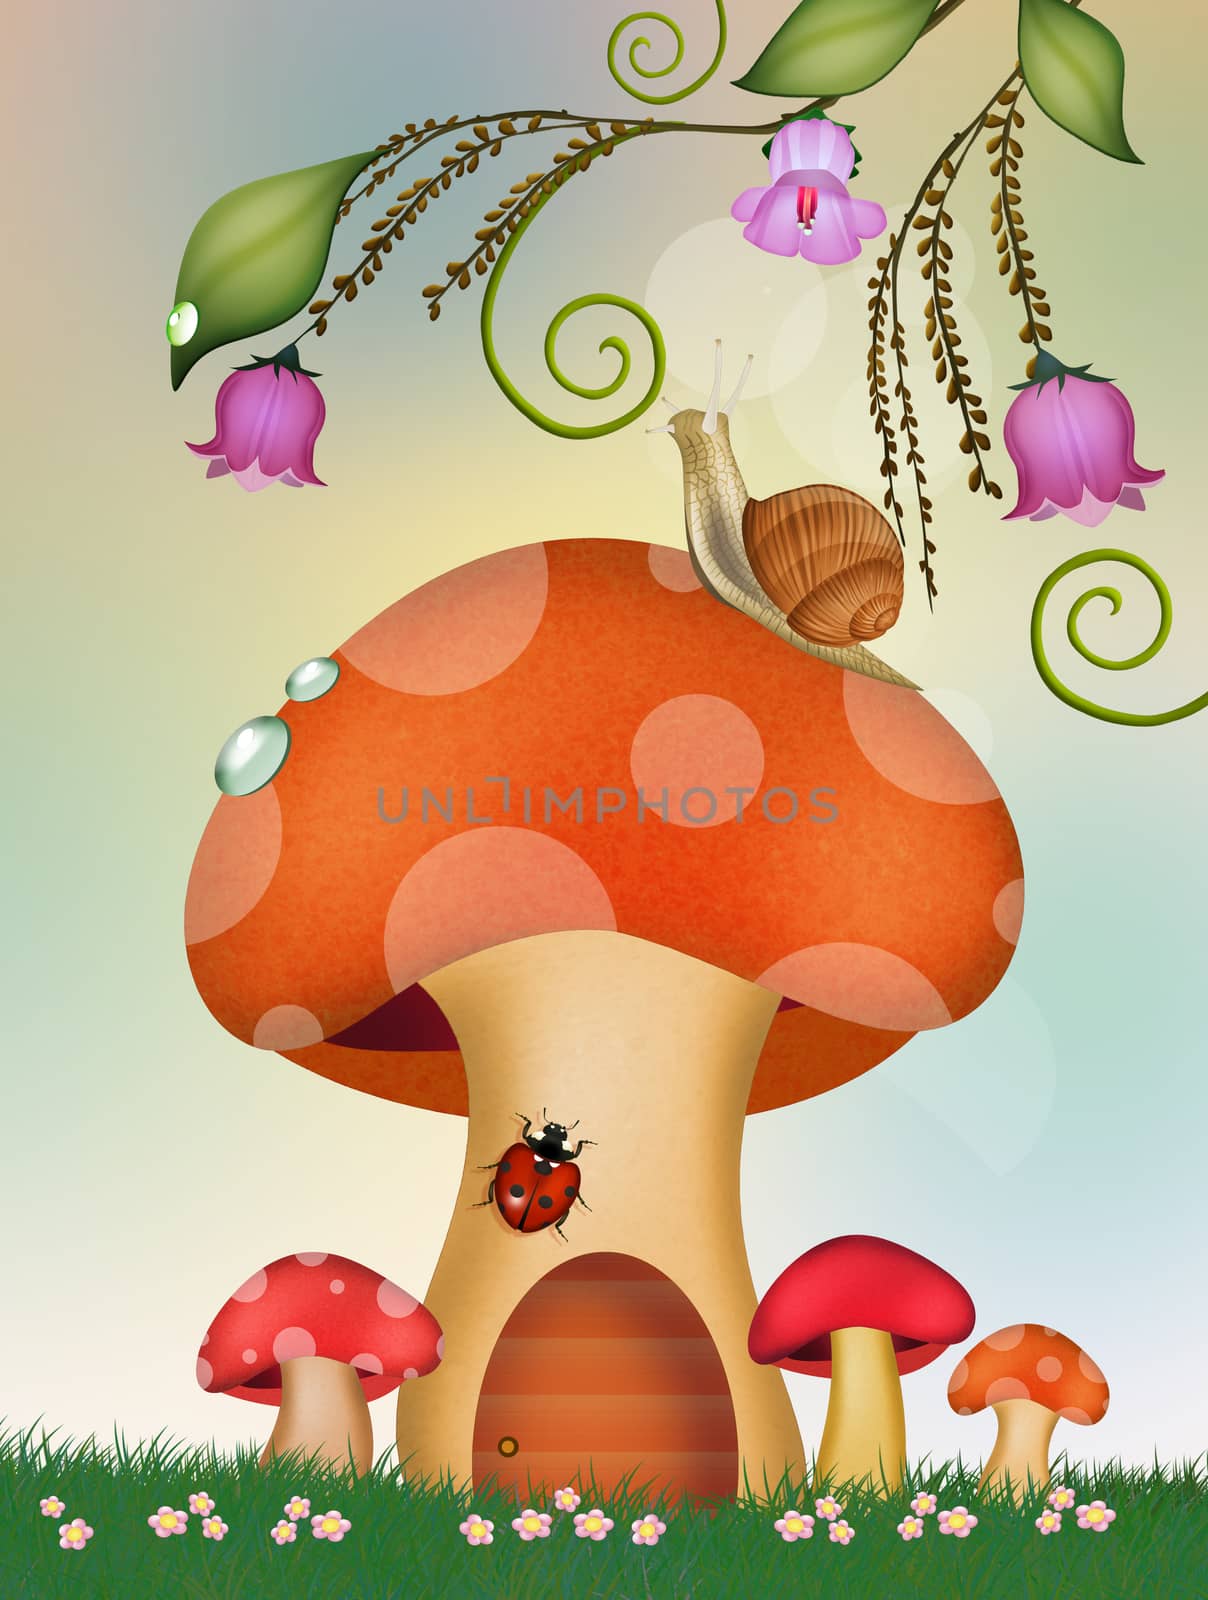 snails on the mushroom by adrenalina